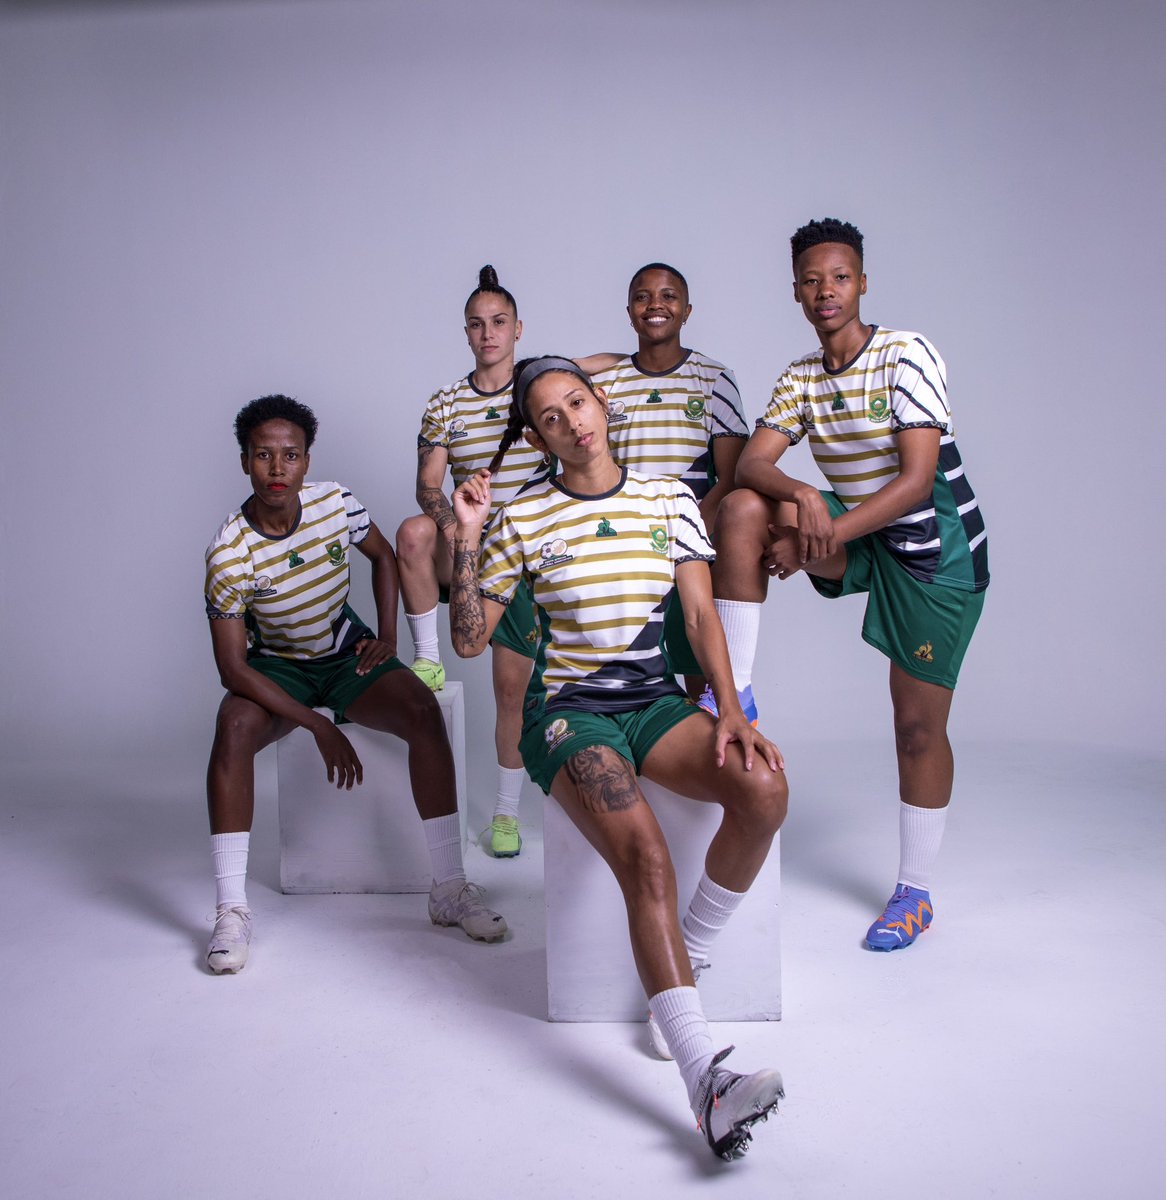 Happy Freedom Day Mzansi 🇿🇦

Alternate Kit dropped. Introducing the all new in Legacy Jersey.

Soft launch 07:00 am. 28/04/2023. 🚀
Set your clocks to see more 👀⏱️

#Lecoqsportifza #safa #lcsport #shareyourlcs #banyana #bafana #collection #launch #freedomday